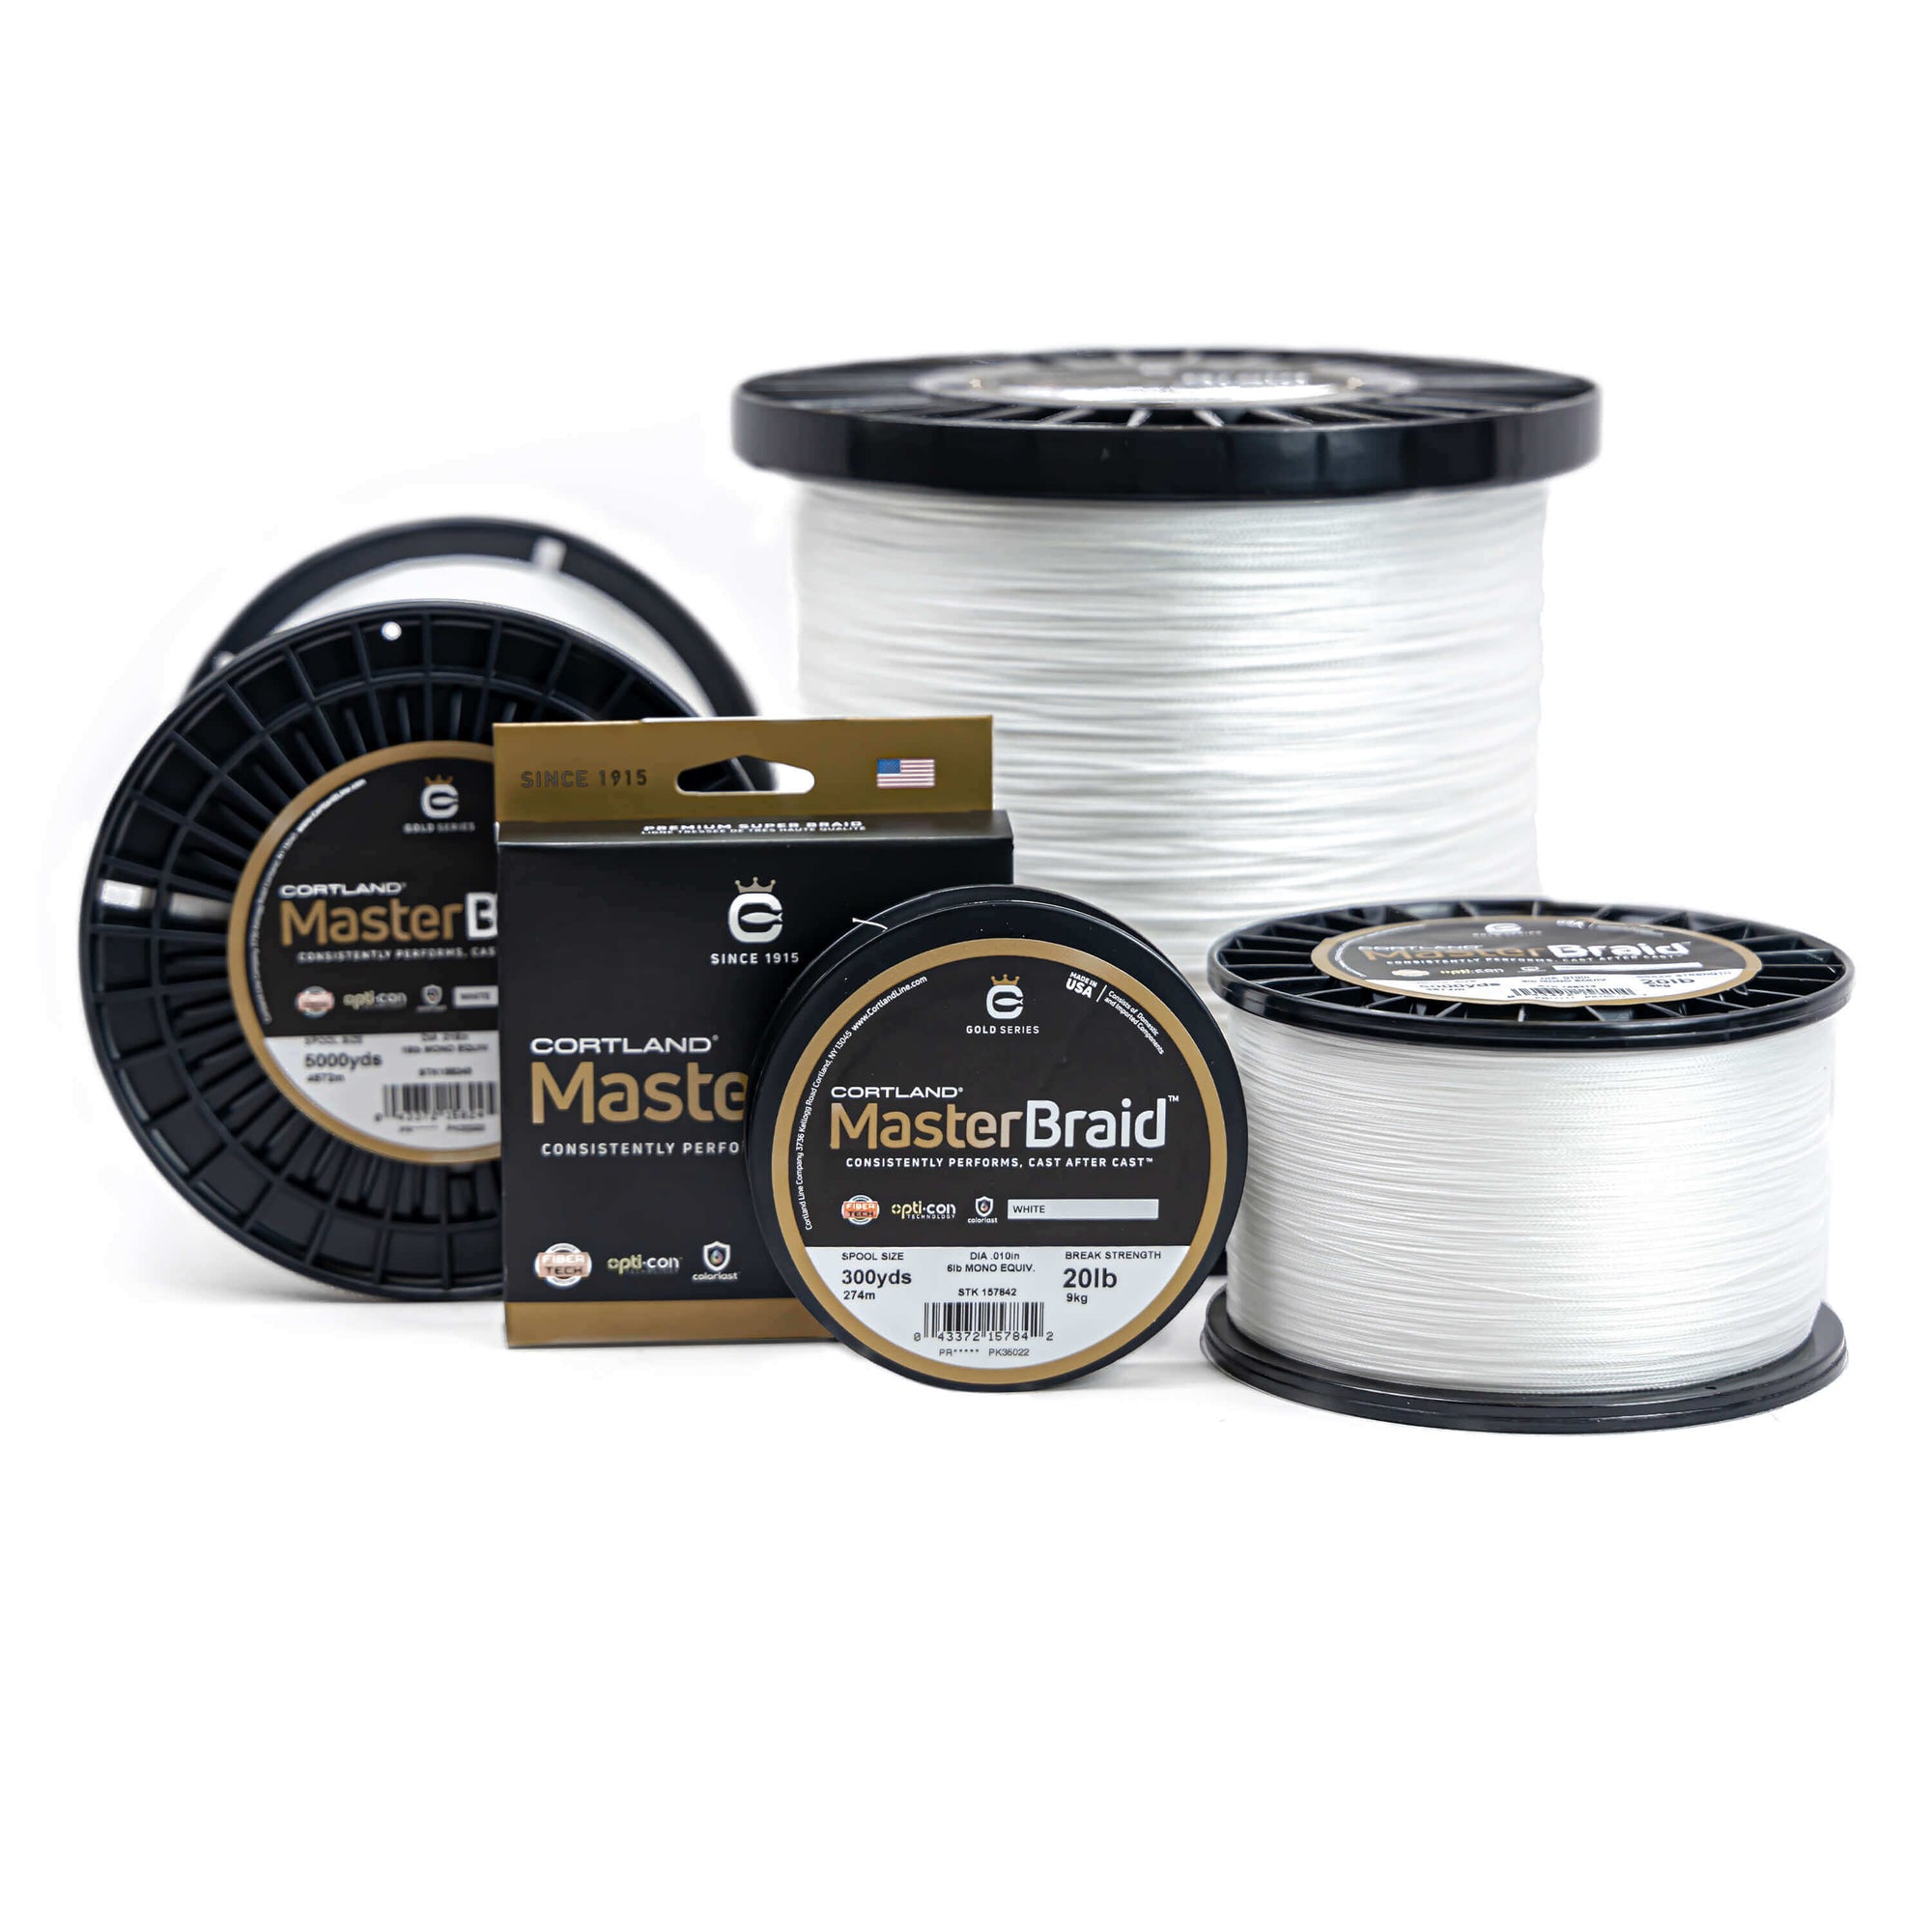 Stren Monofilament Fishing Lines & Leaders 30 lb Line Weight